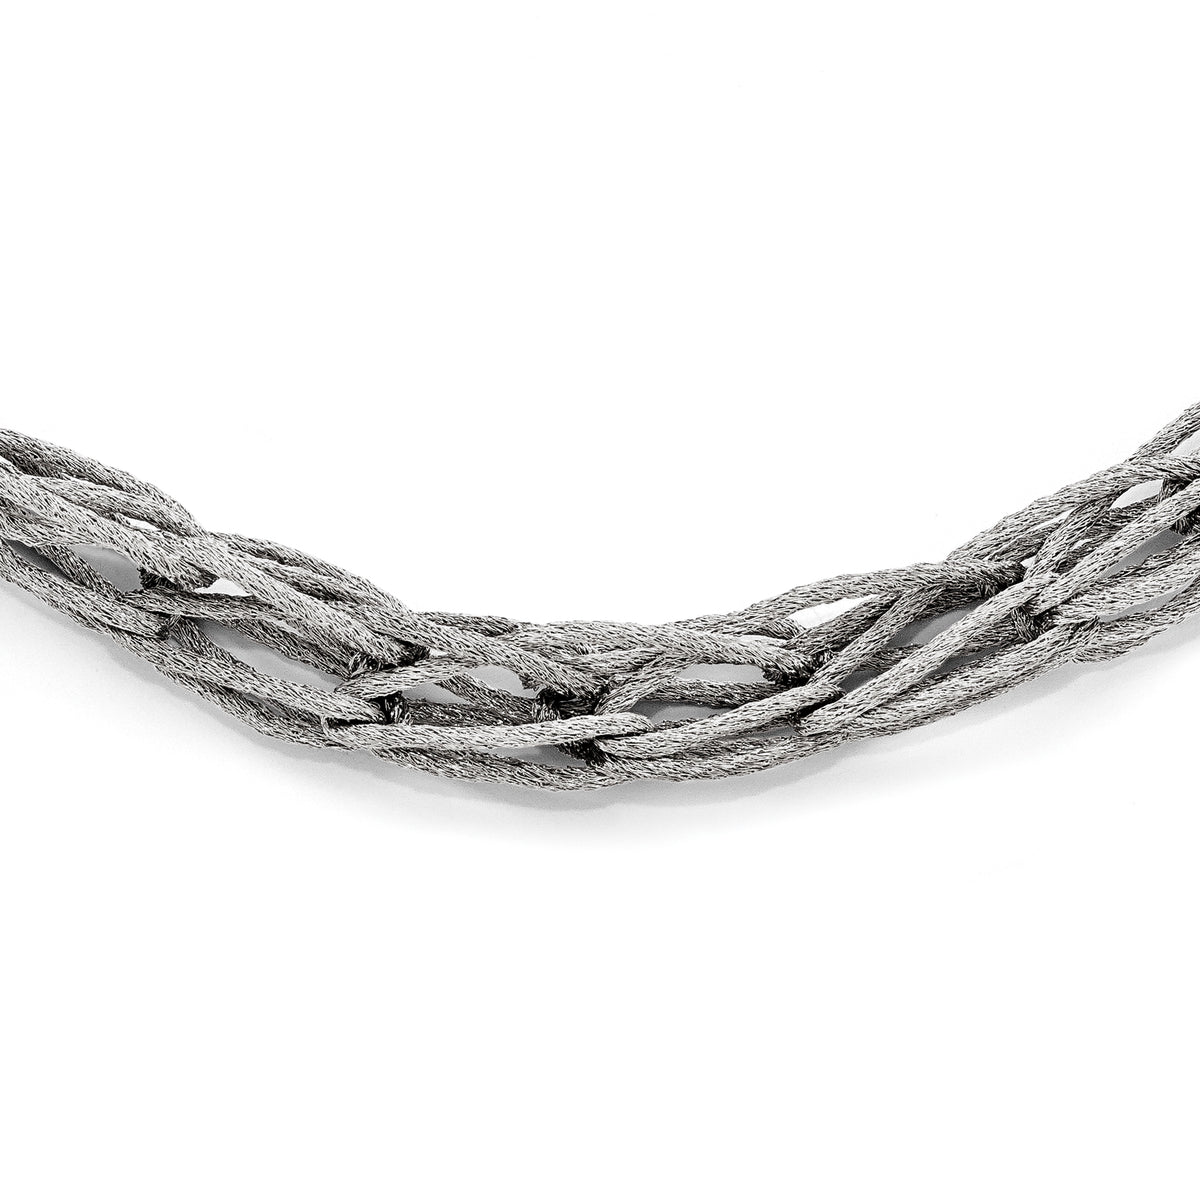 Sterling Silver Mesh Link Necklace